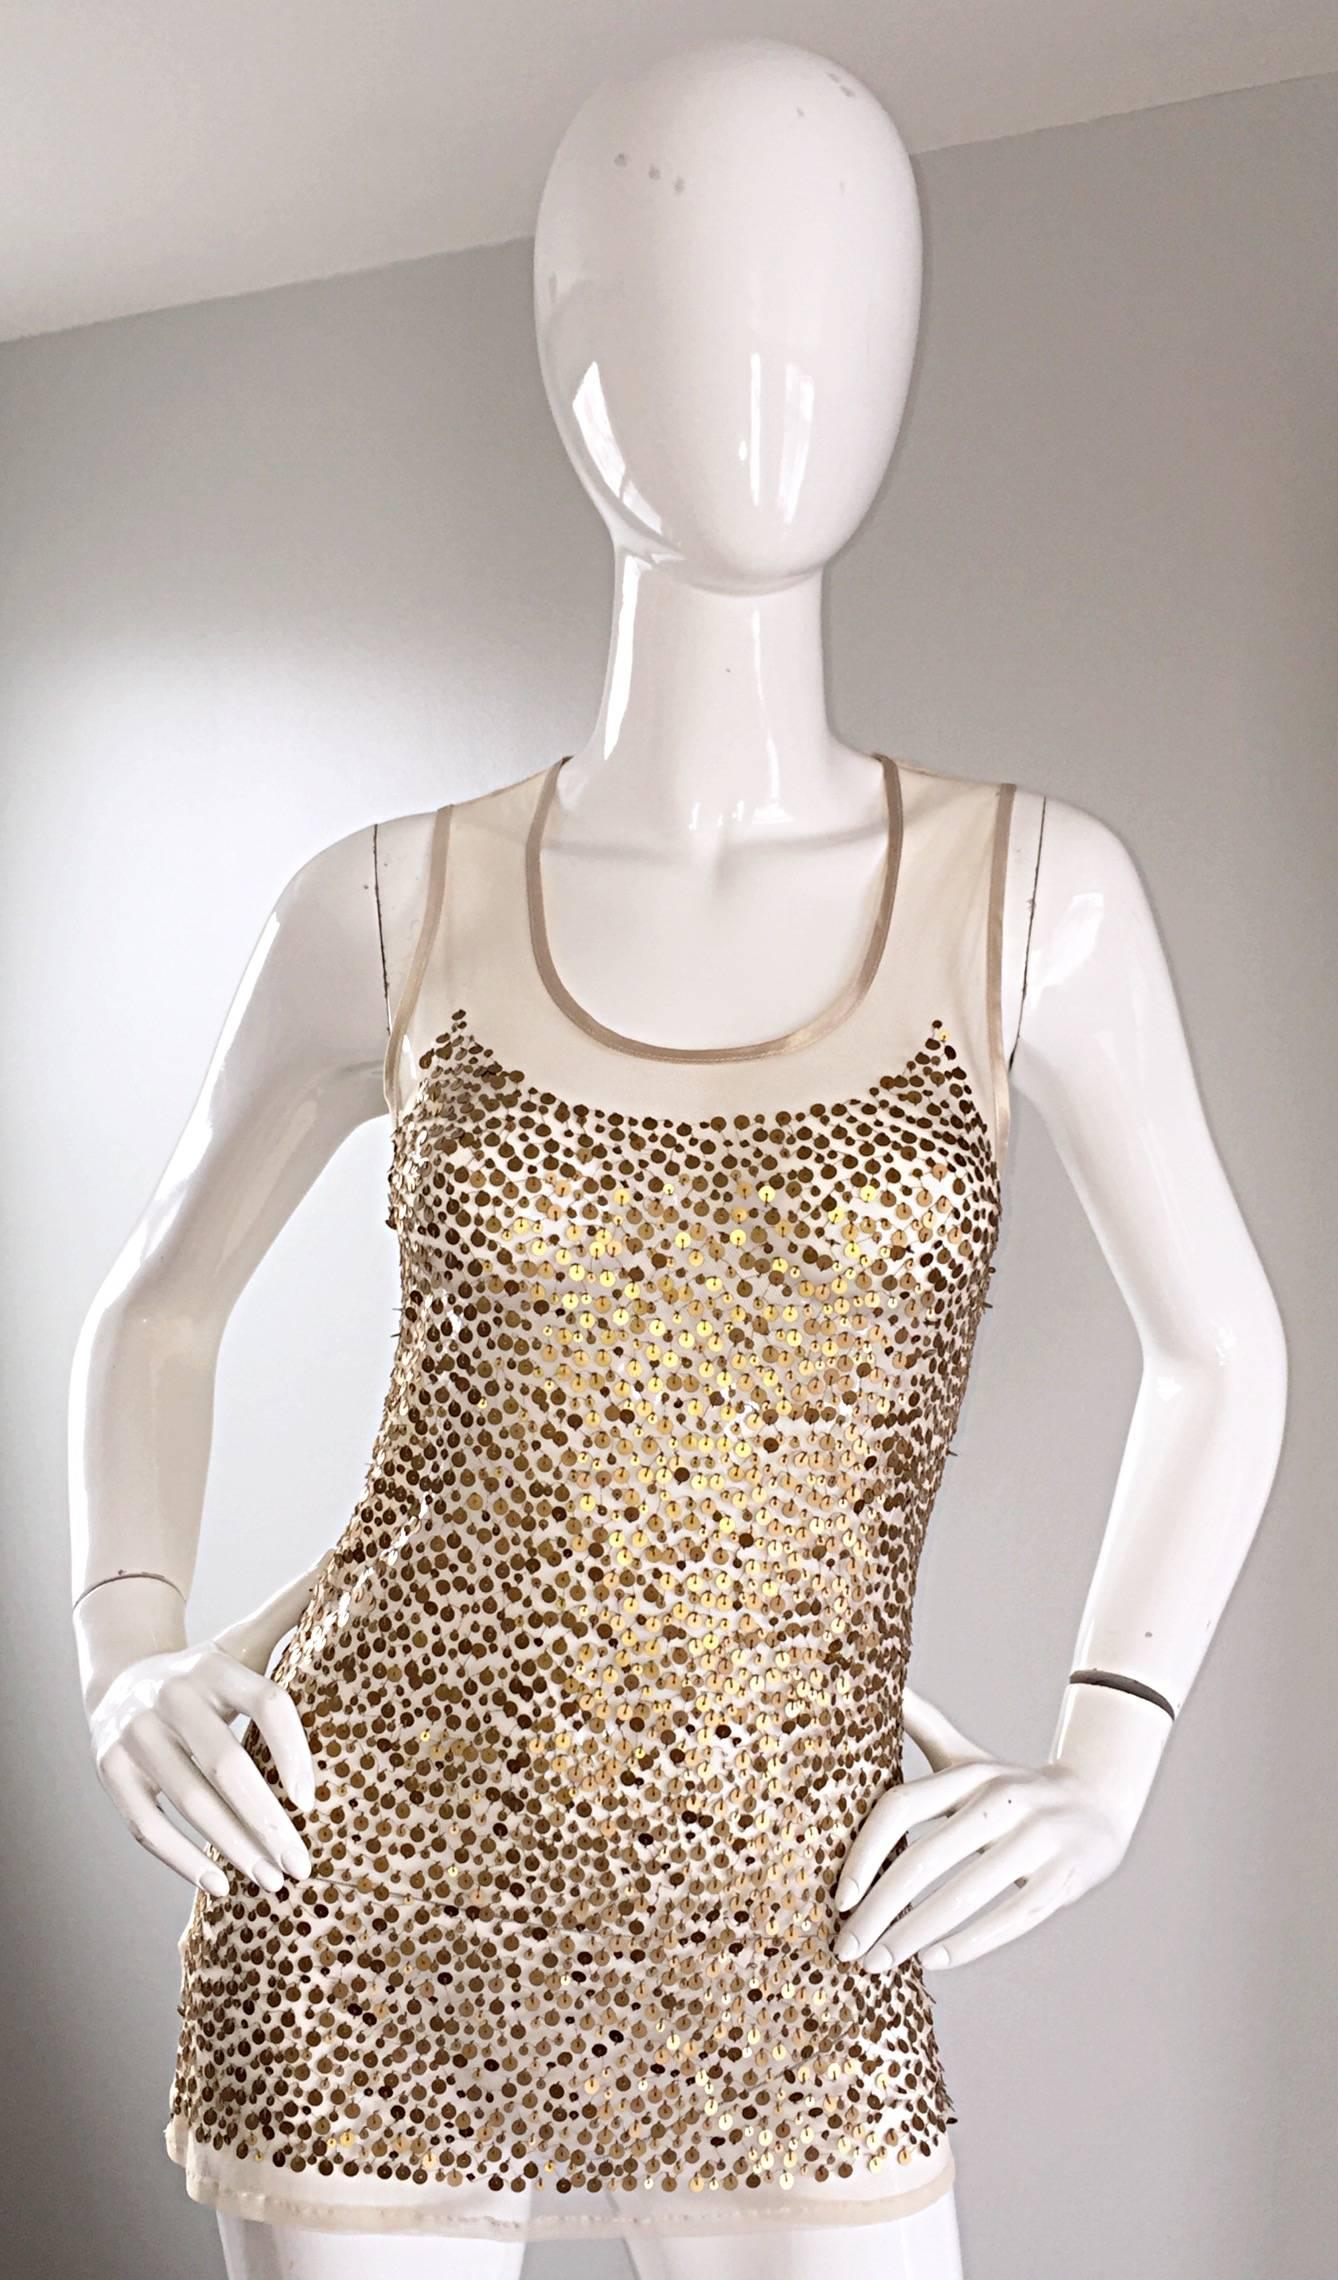 Gorgeous vintage GIANFRANCO FERRE (new with original tags attached) 1990s semi sheer golden bronze sequin tank! Features hundreds of hand-sewn sequins throughout the front bodice that form the illusion of a strapless bustier top. Sexy keyhole at the